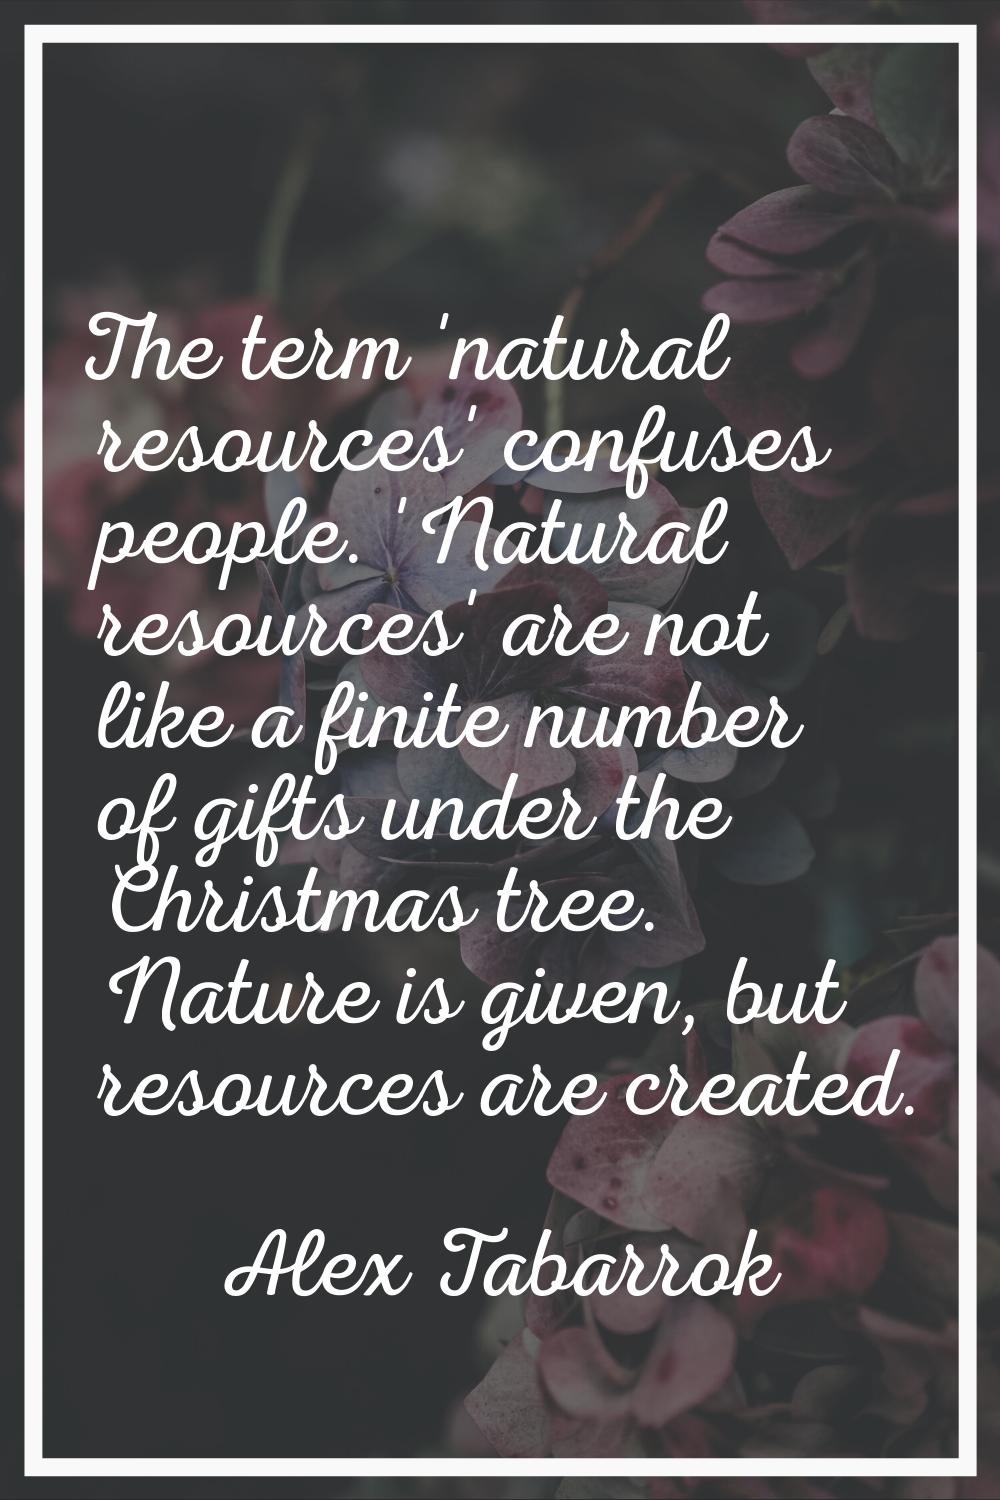 The term 'natural resources' confuses people. 'Natural resources' are not like a finite number of g